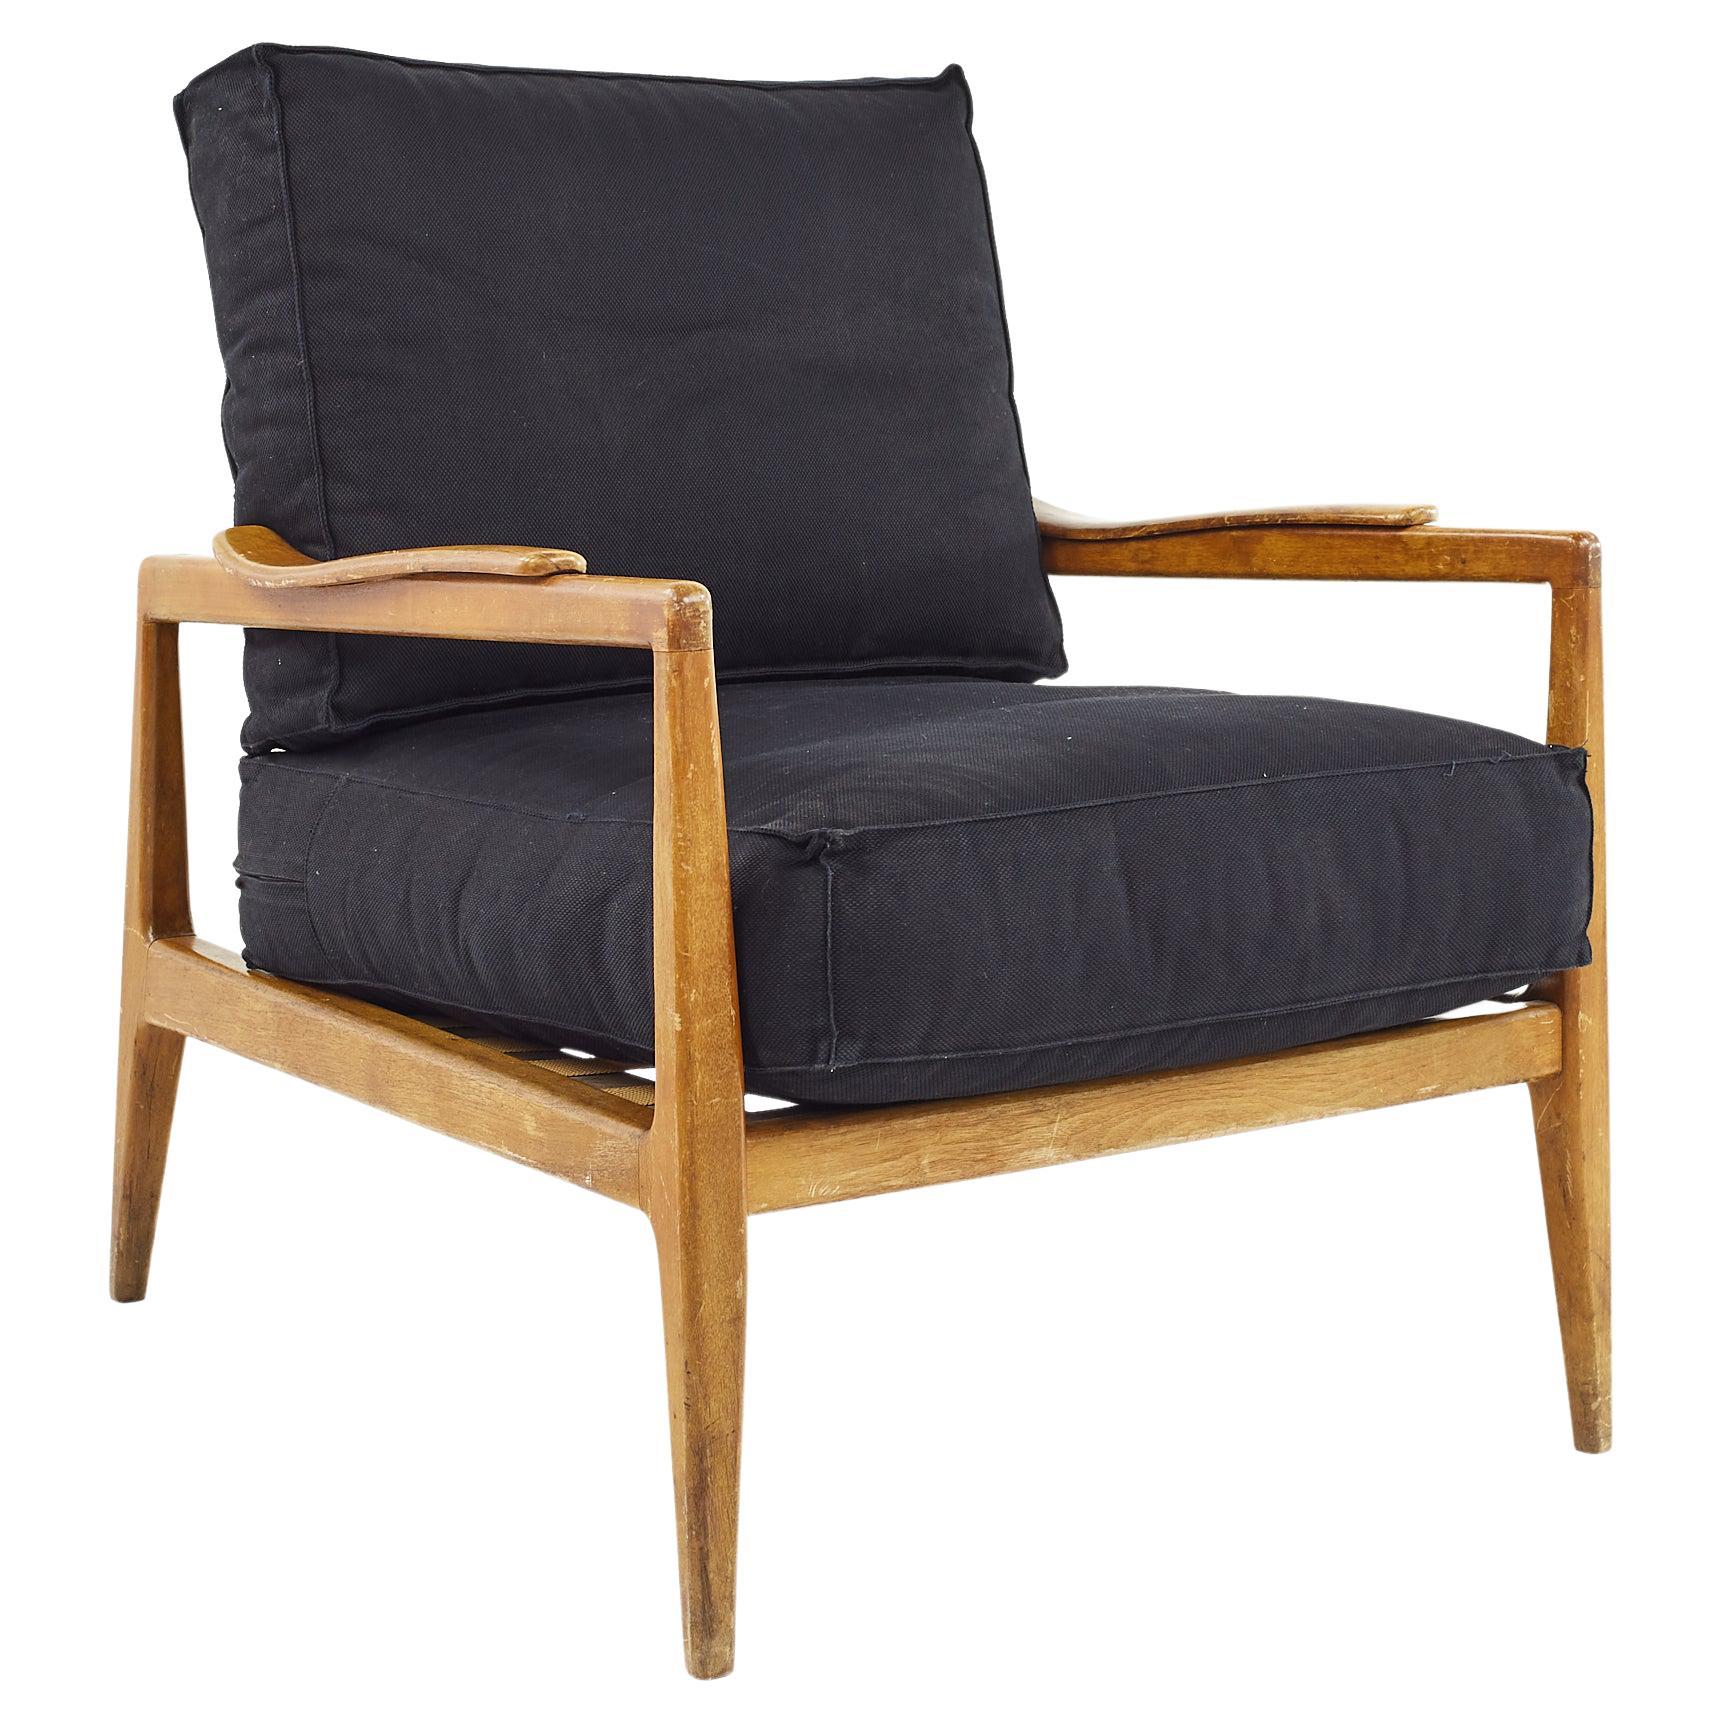 Edmond Spence Urban Aire Mid Century Walnut Lounge Chair with Black Upholstery For Sale